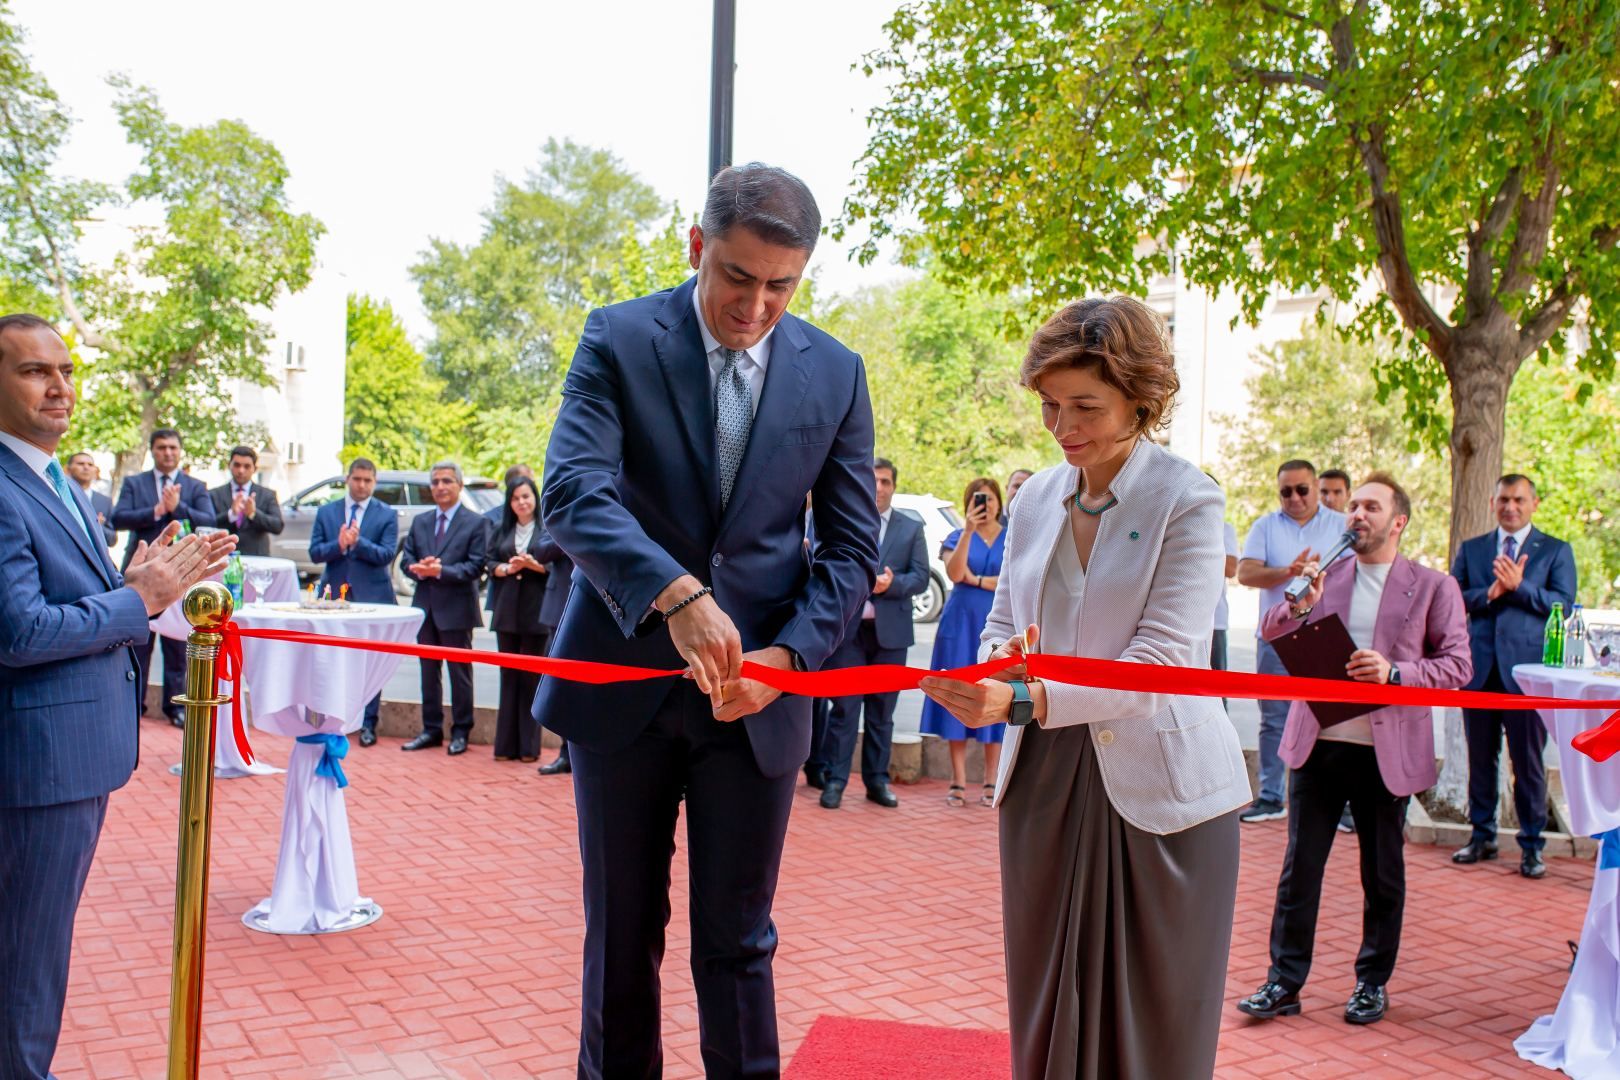 Representative offices of PASHA Life and PASHA Insurance opened in Nakhchivan